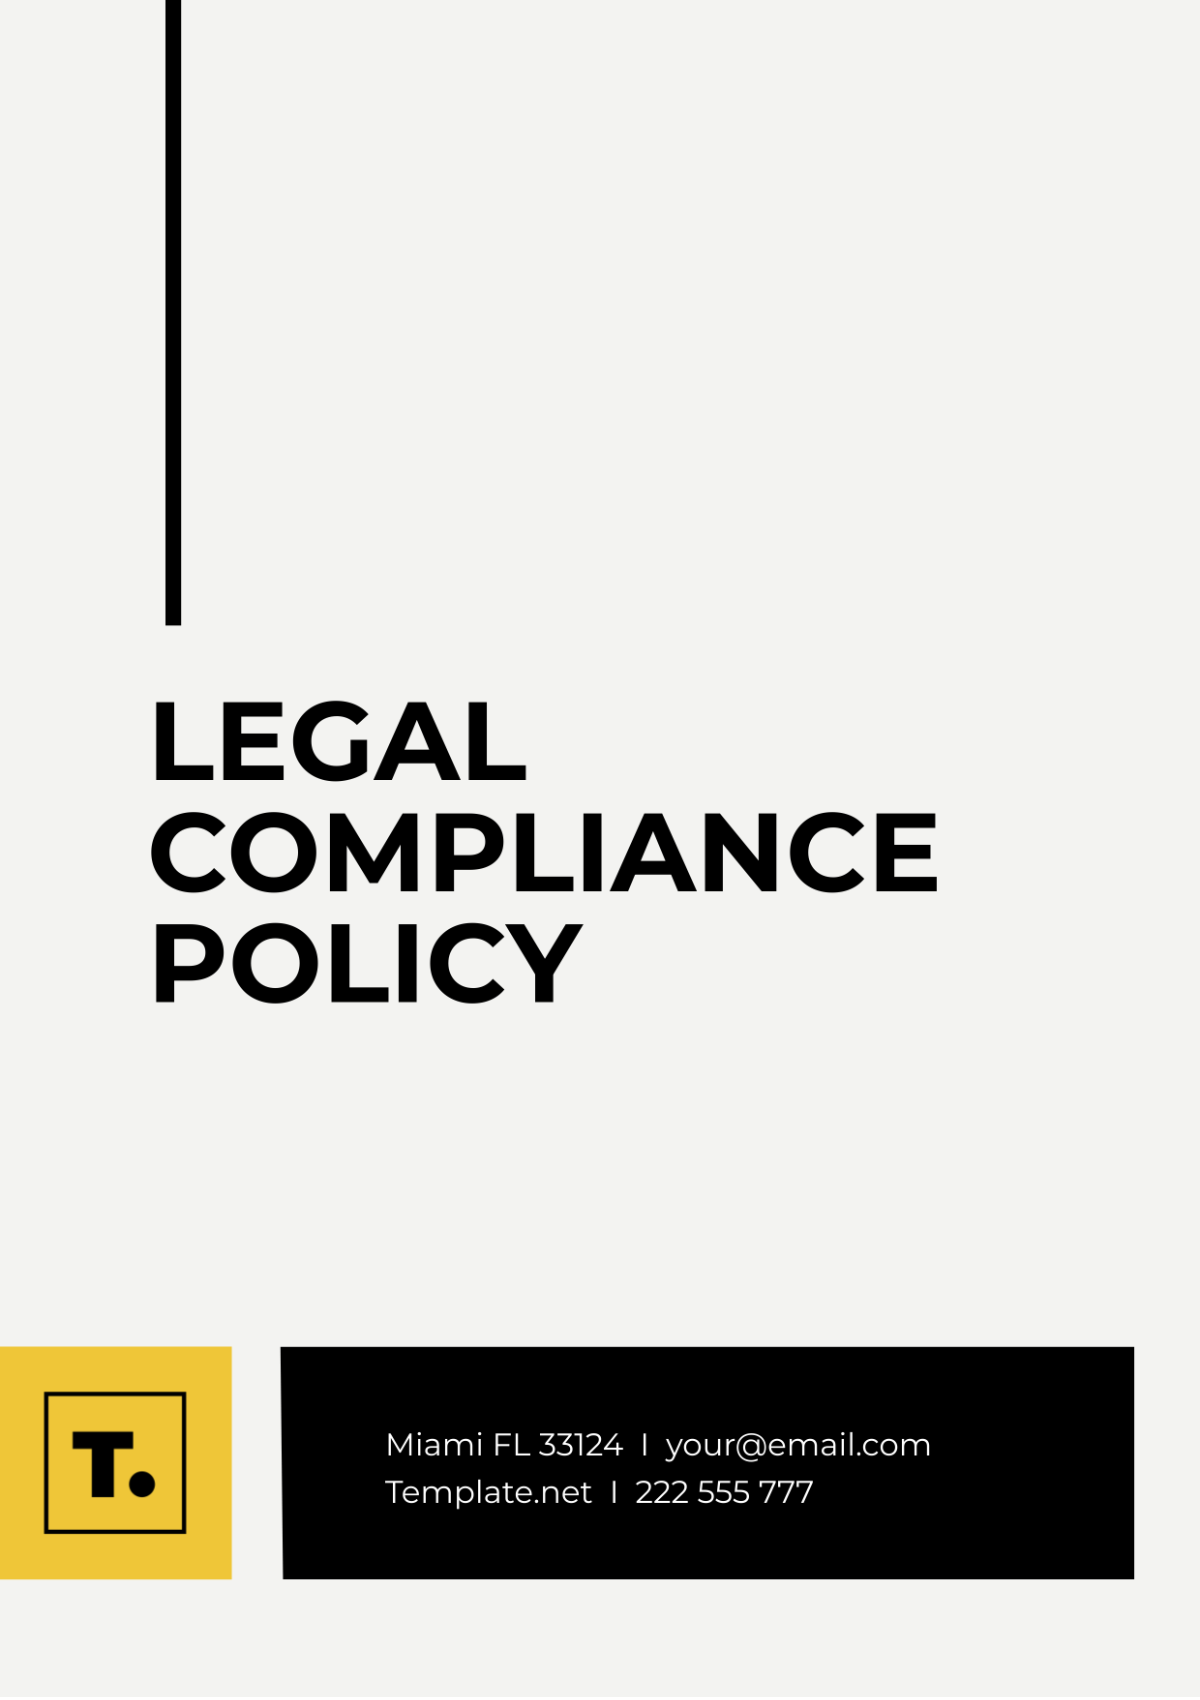 Free Legal Compliance Policy Template